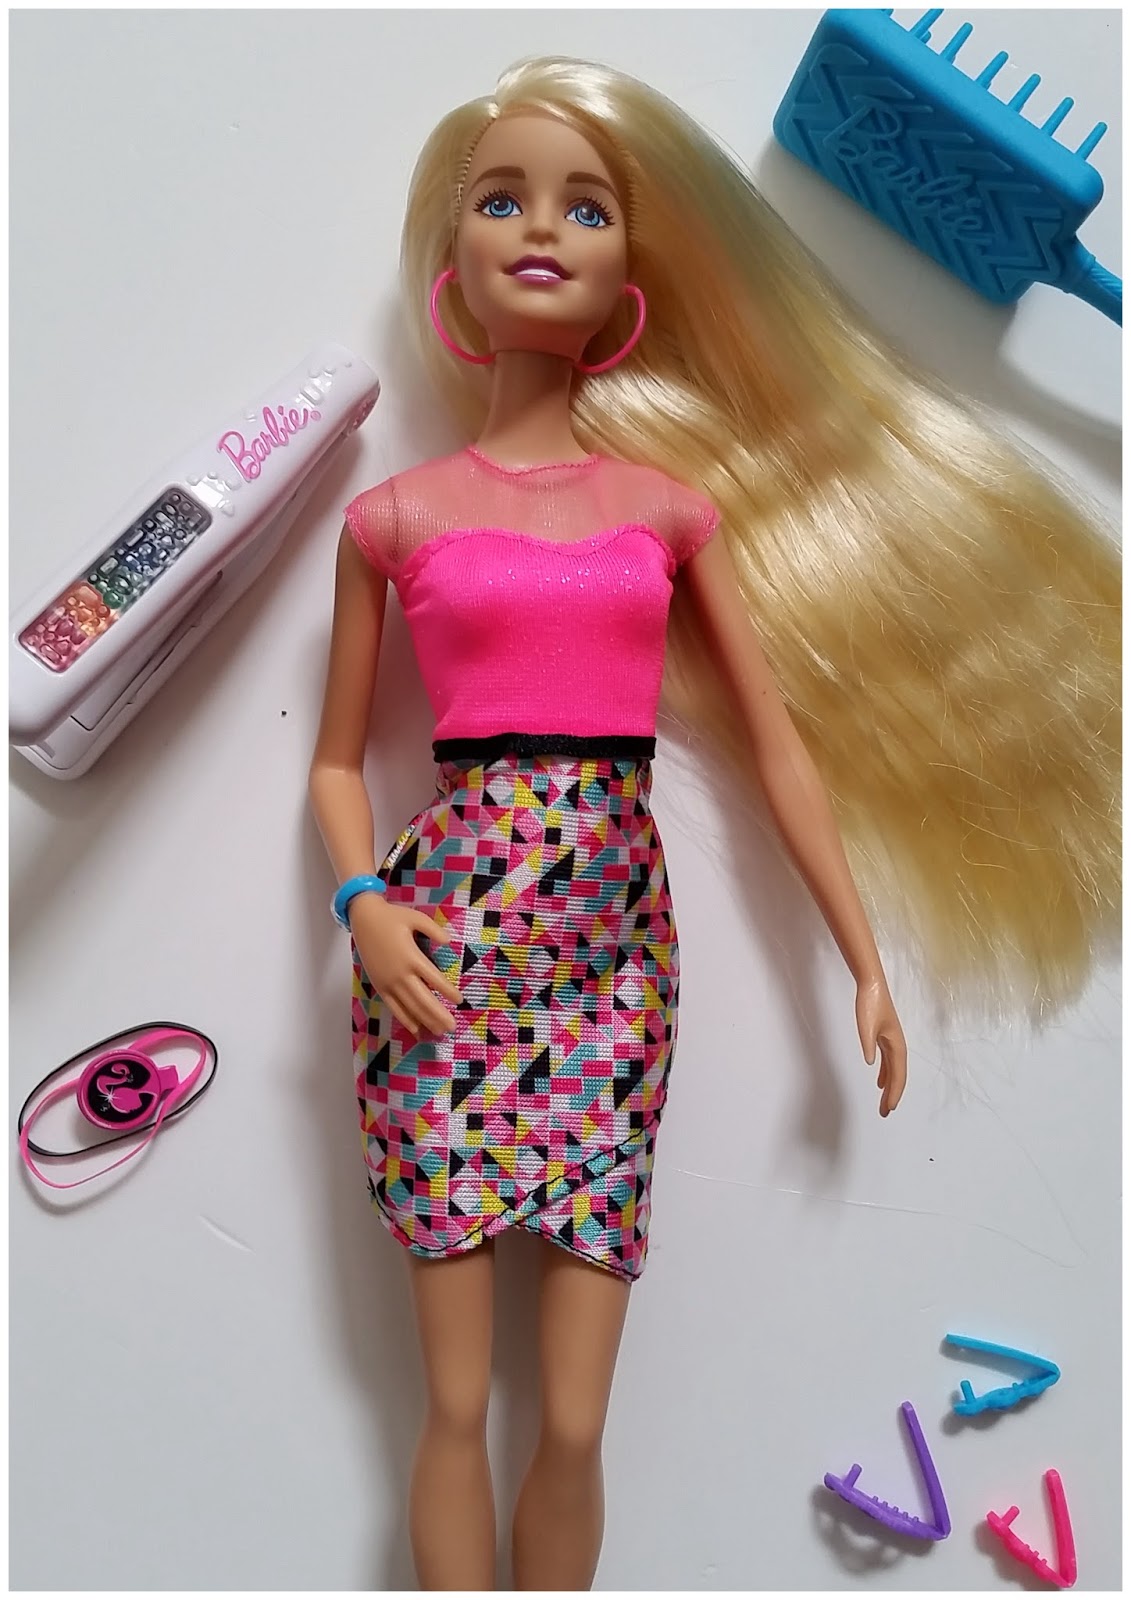 Mummy Of 3 Diaries: Barbie Rainbow Makeover Hair Doll #Review